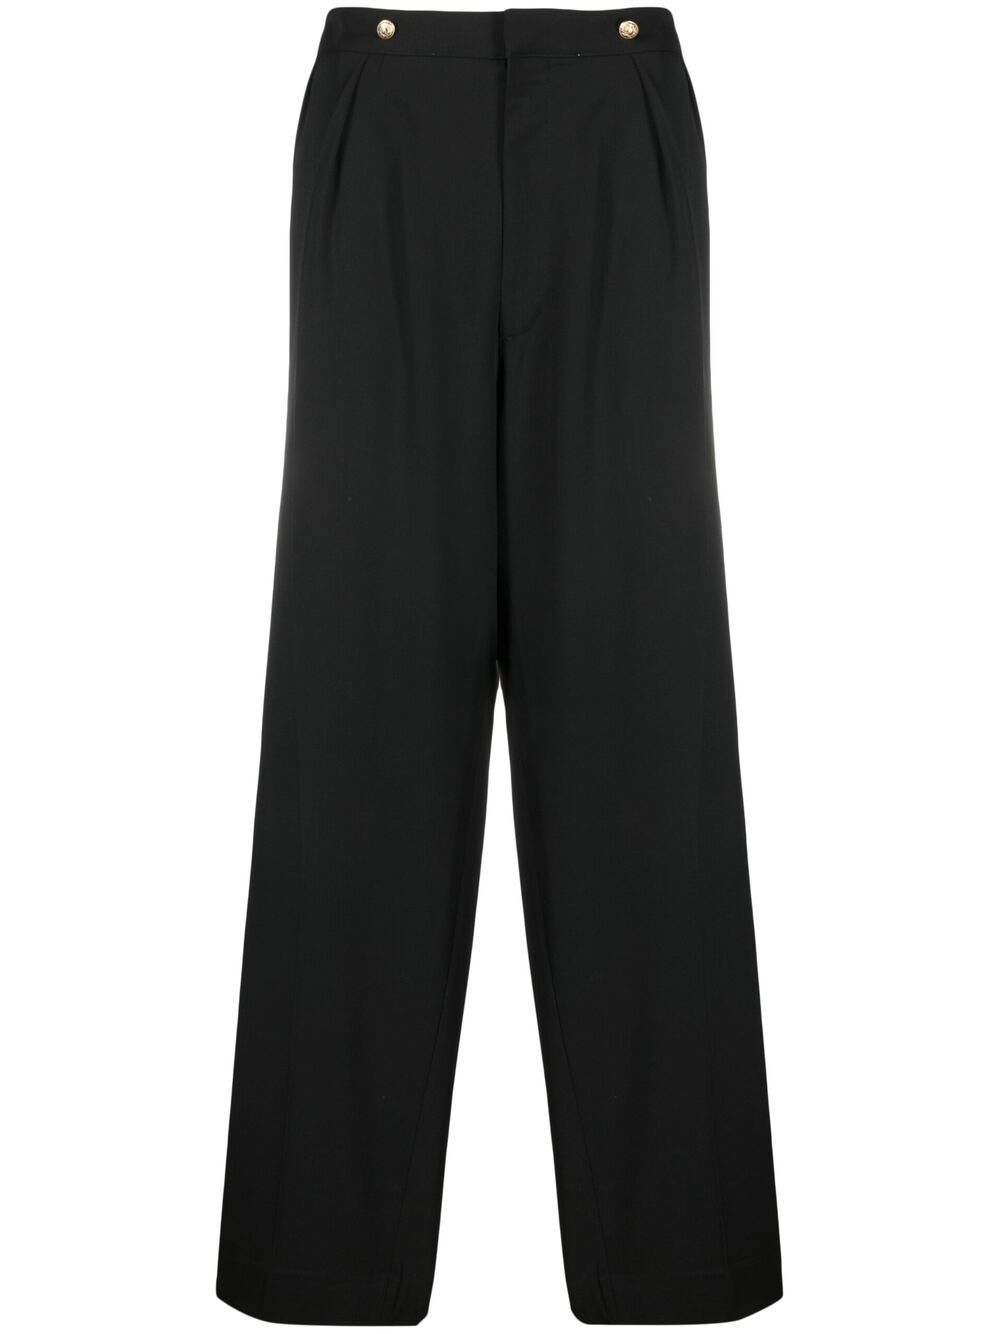 Wales Bonner Straight-leg Tailored Trousers In Black